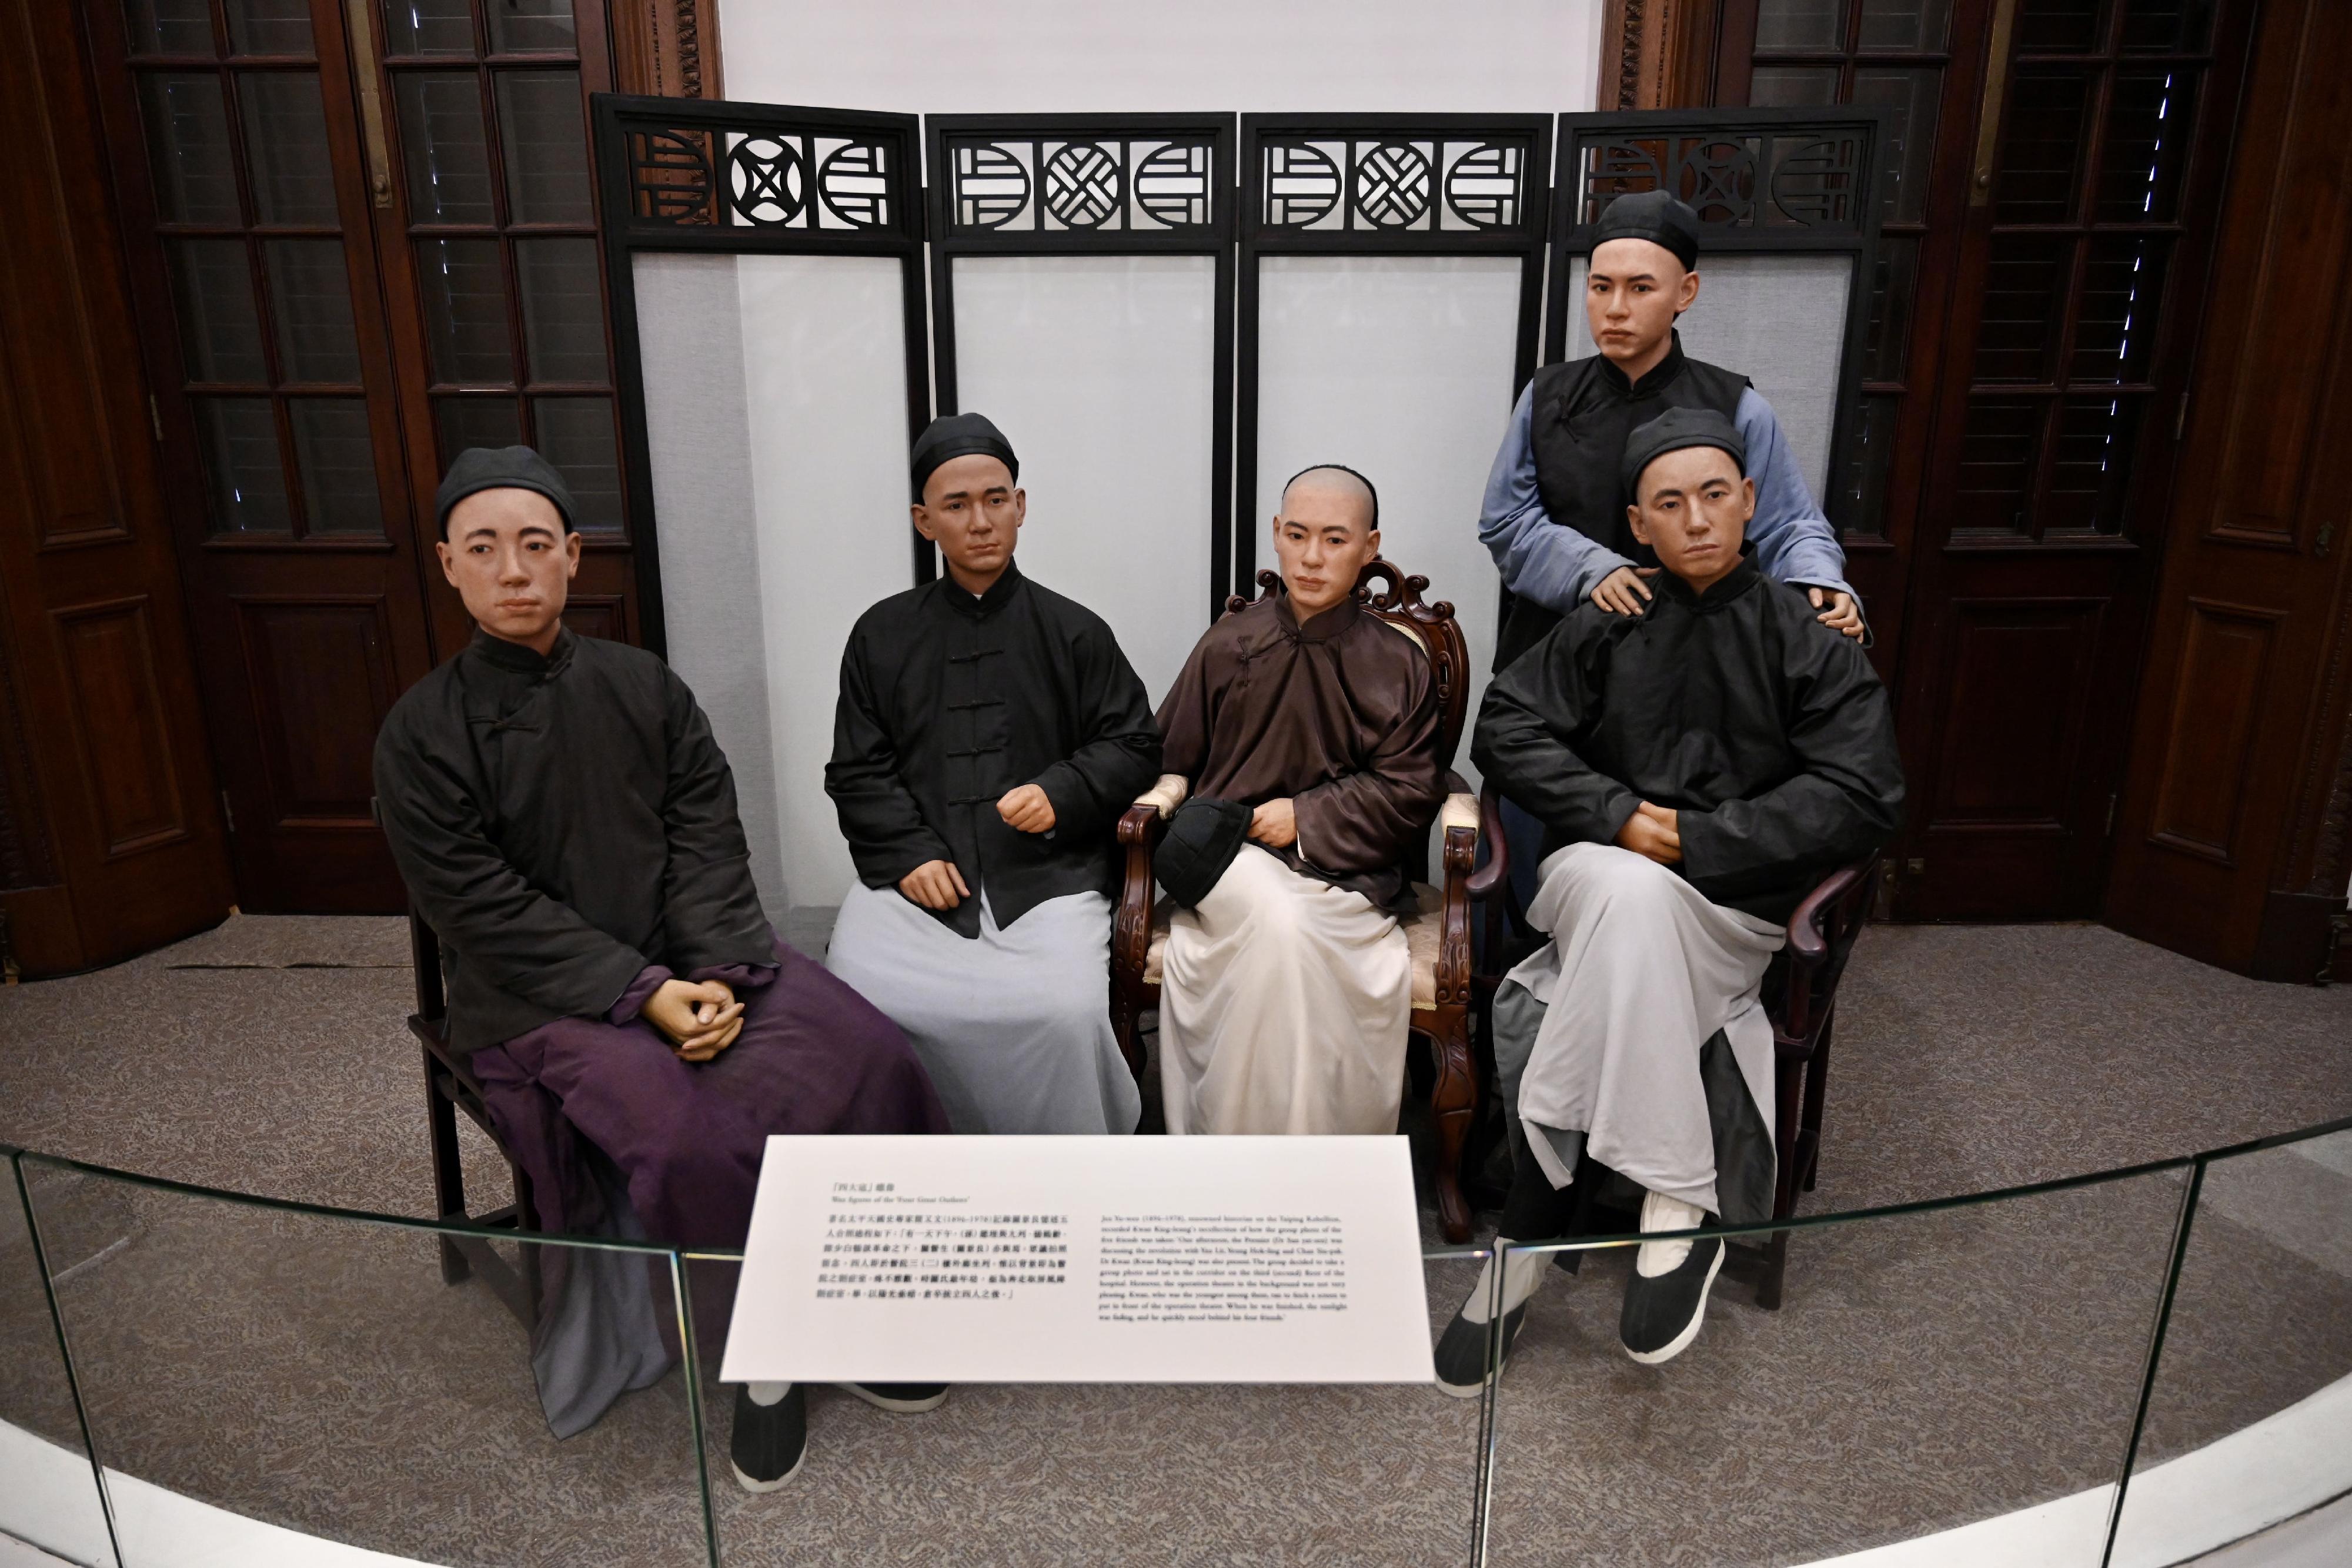 The Dr Sun Yat-sen Museum will hold the thematic exhibition "The Four Great Outlaws - Reshaping the Memories of the Revolution through a Photo" from tomorrow (December 10). Picture shows a reconstruction of the scene where the group photo of the "Four Great Outlaws" and Kwan King-leung was taken.